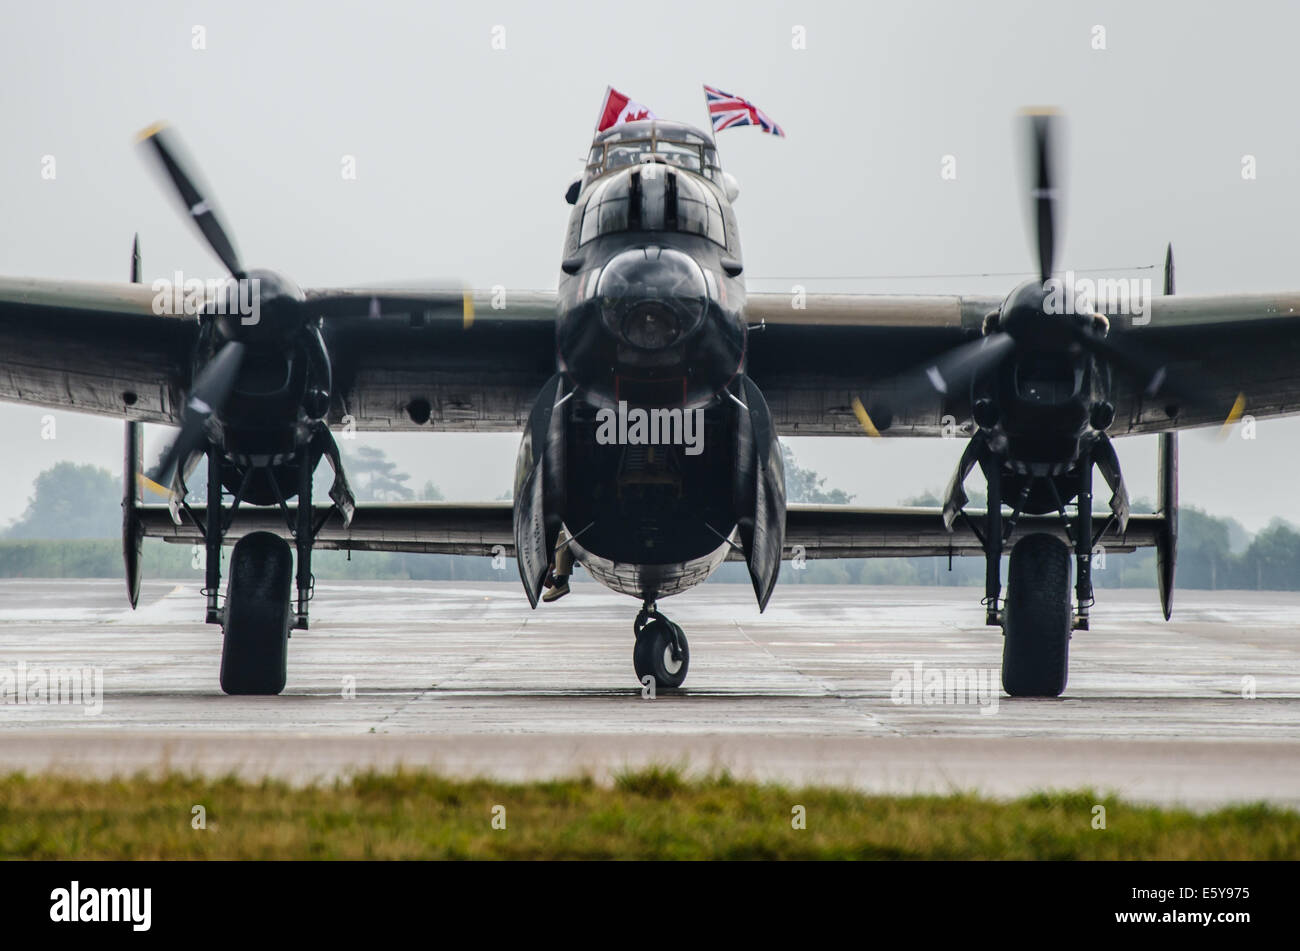 The Canadian Lancaster has made the long flight across the Atlantic to the UK. Seen after landing at RAF Coningsby taxiing in with national flags Stock Photo